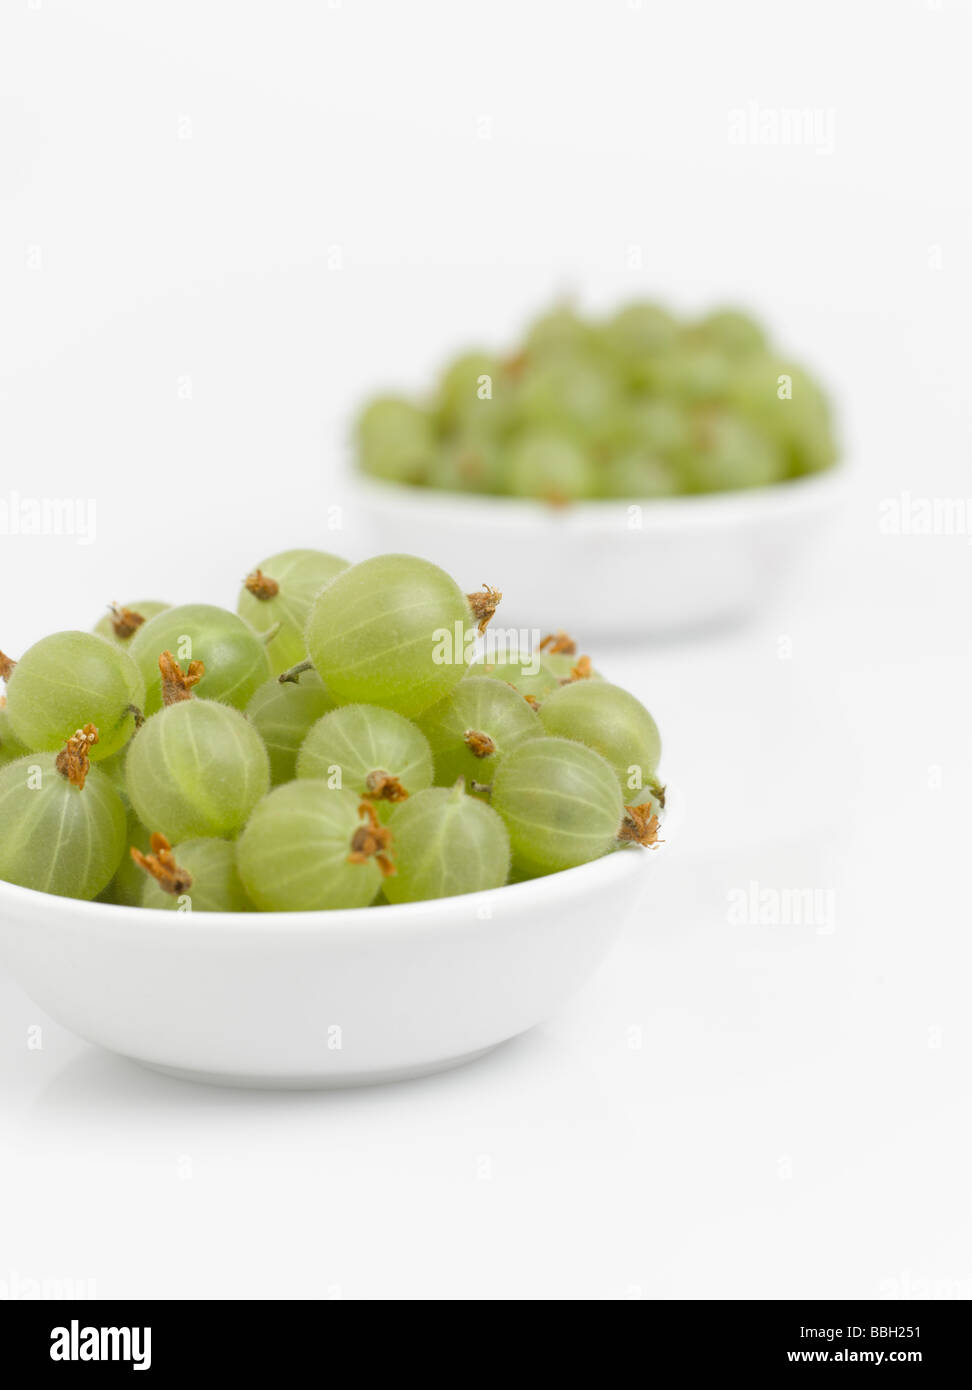 Bowls of gooseberries isolated on white background Stock Photo